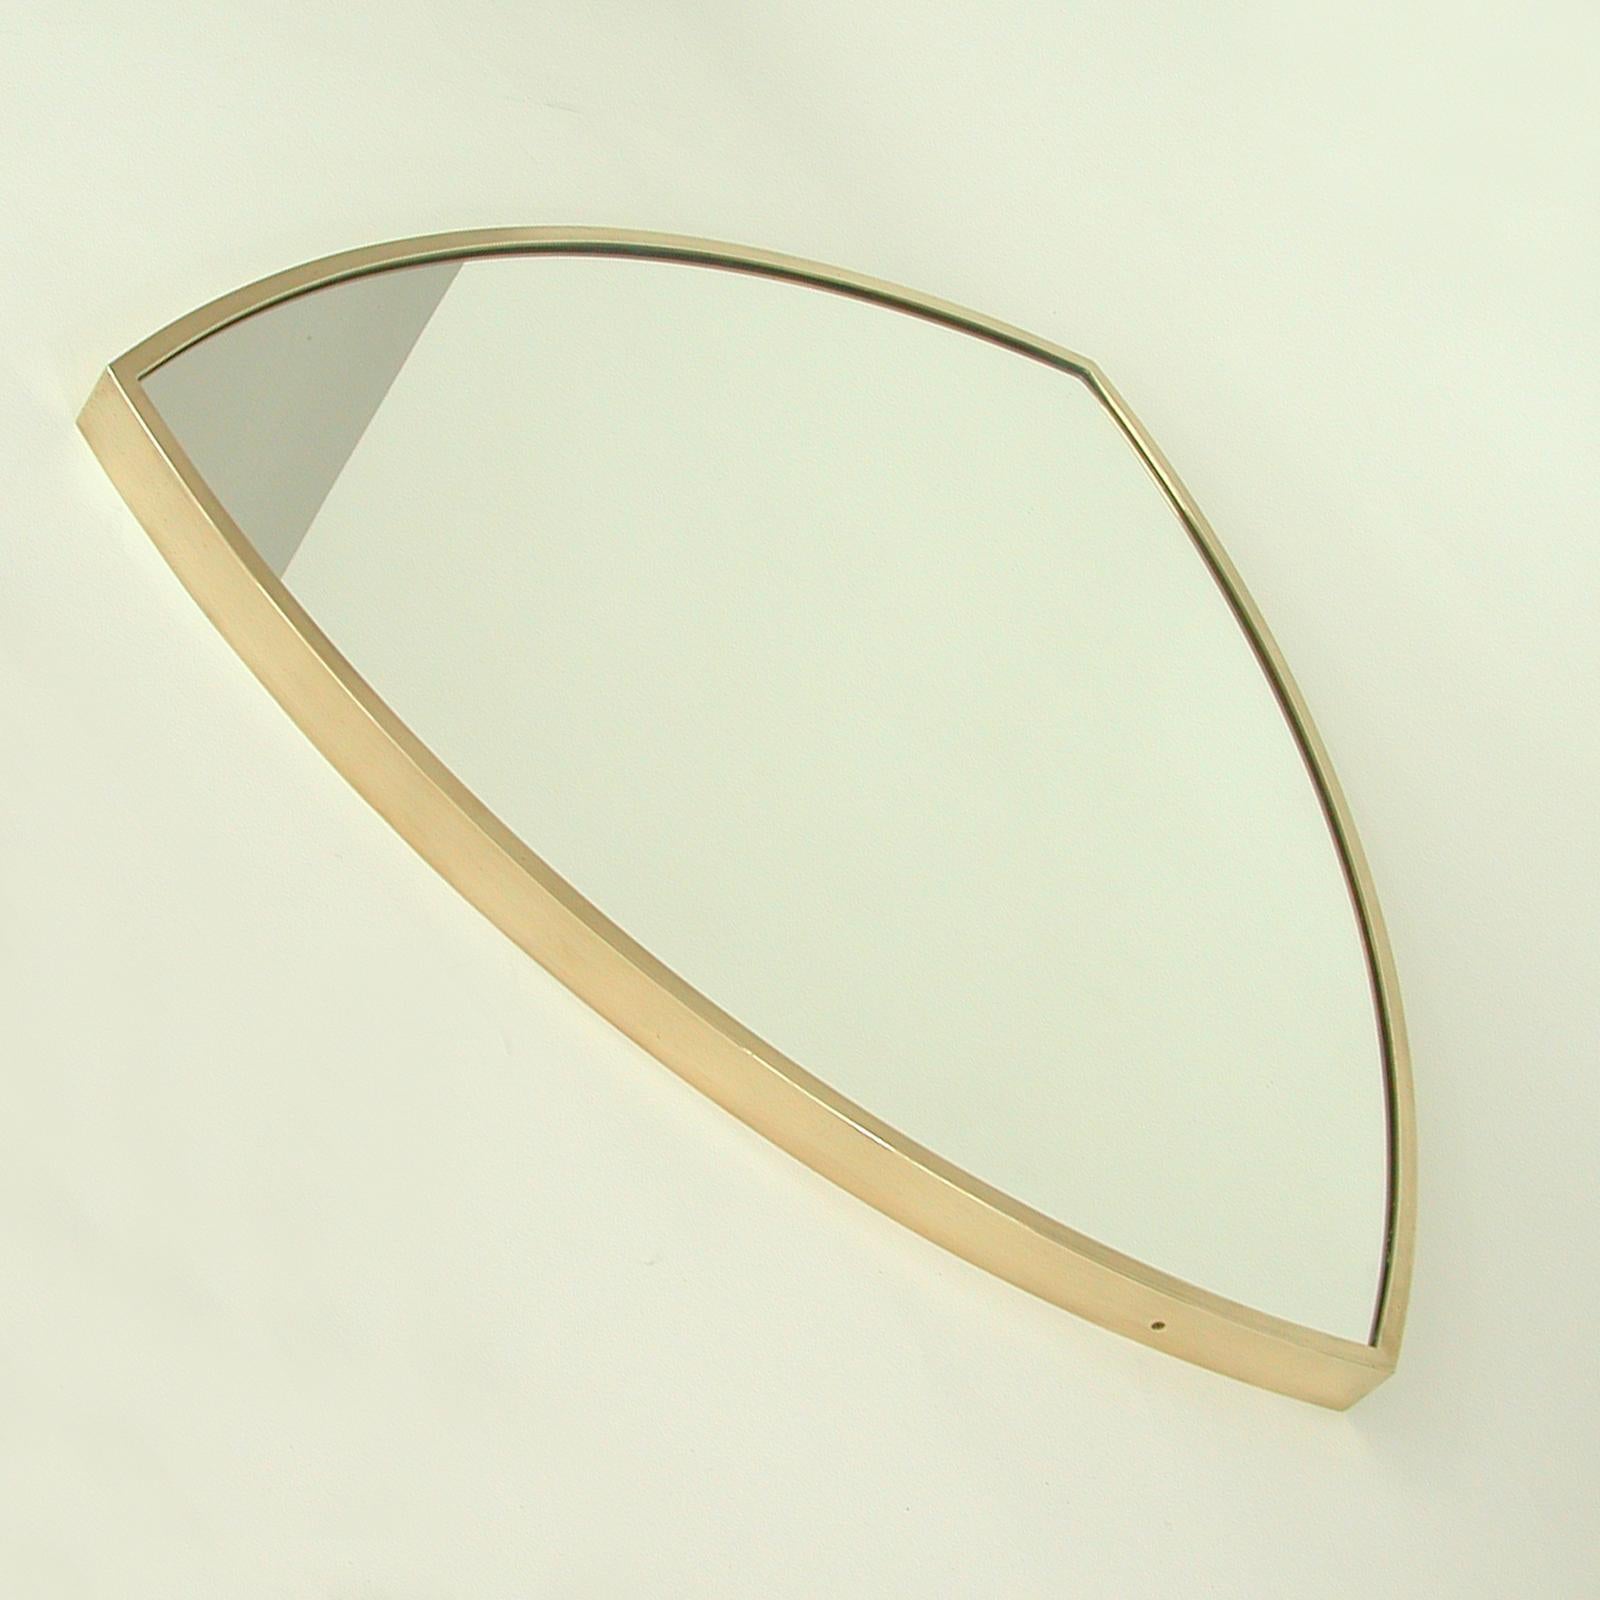 Mid-20th Century Midcentury Brass Shield Shaped Wall Mirror, Gio Ponti Style, Italy 1950s For Sale